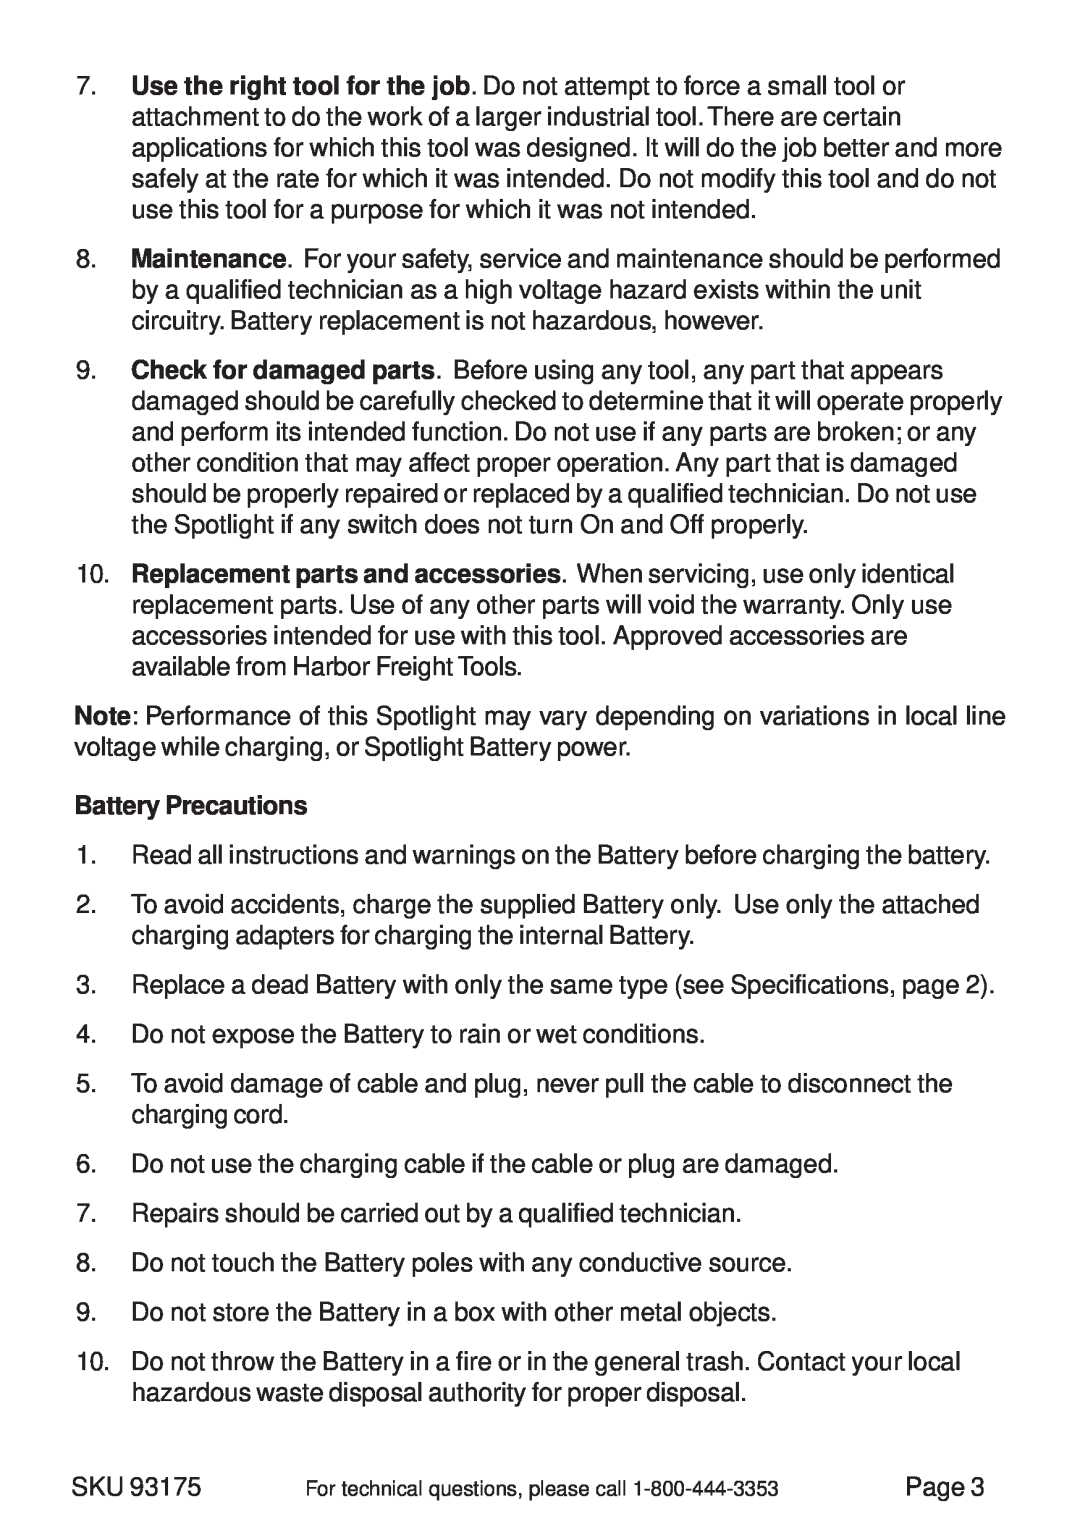 Chicago Electric 93175 operating instructions Battery Precautions 